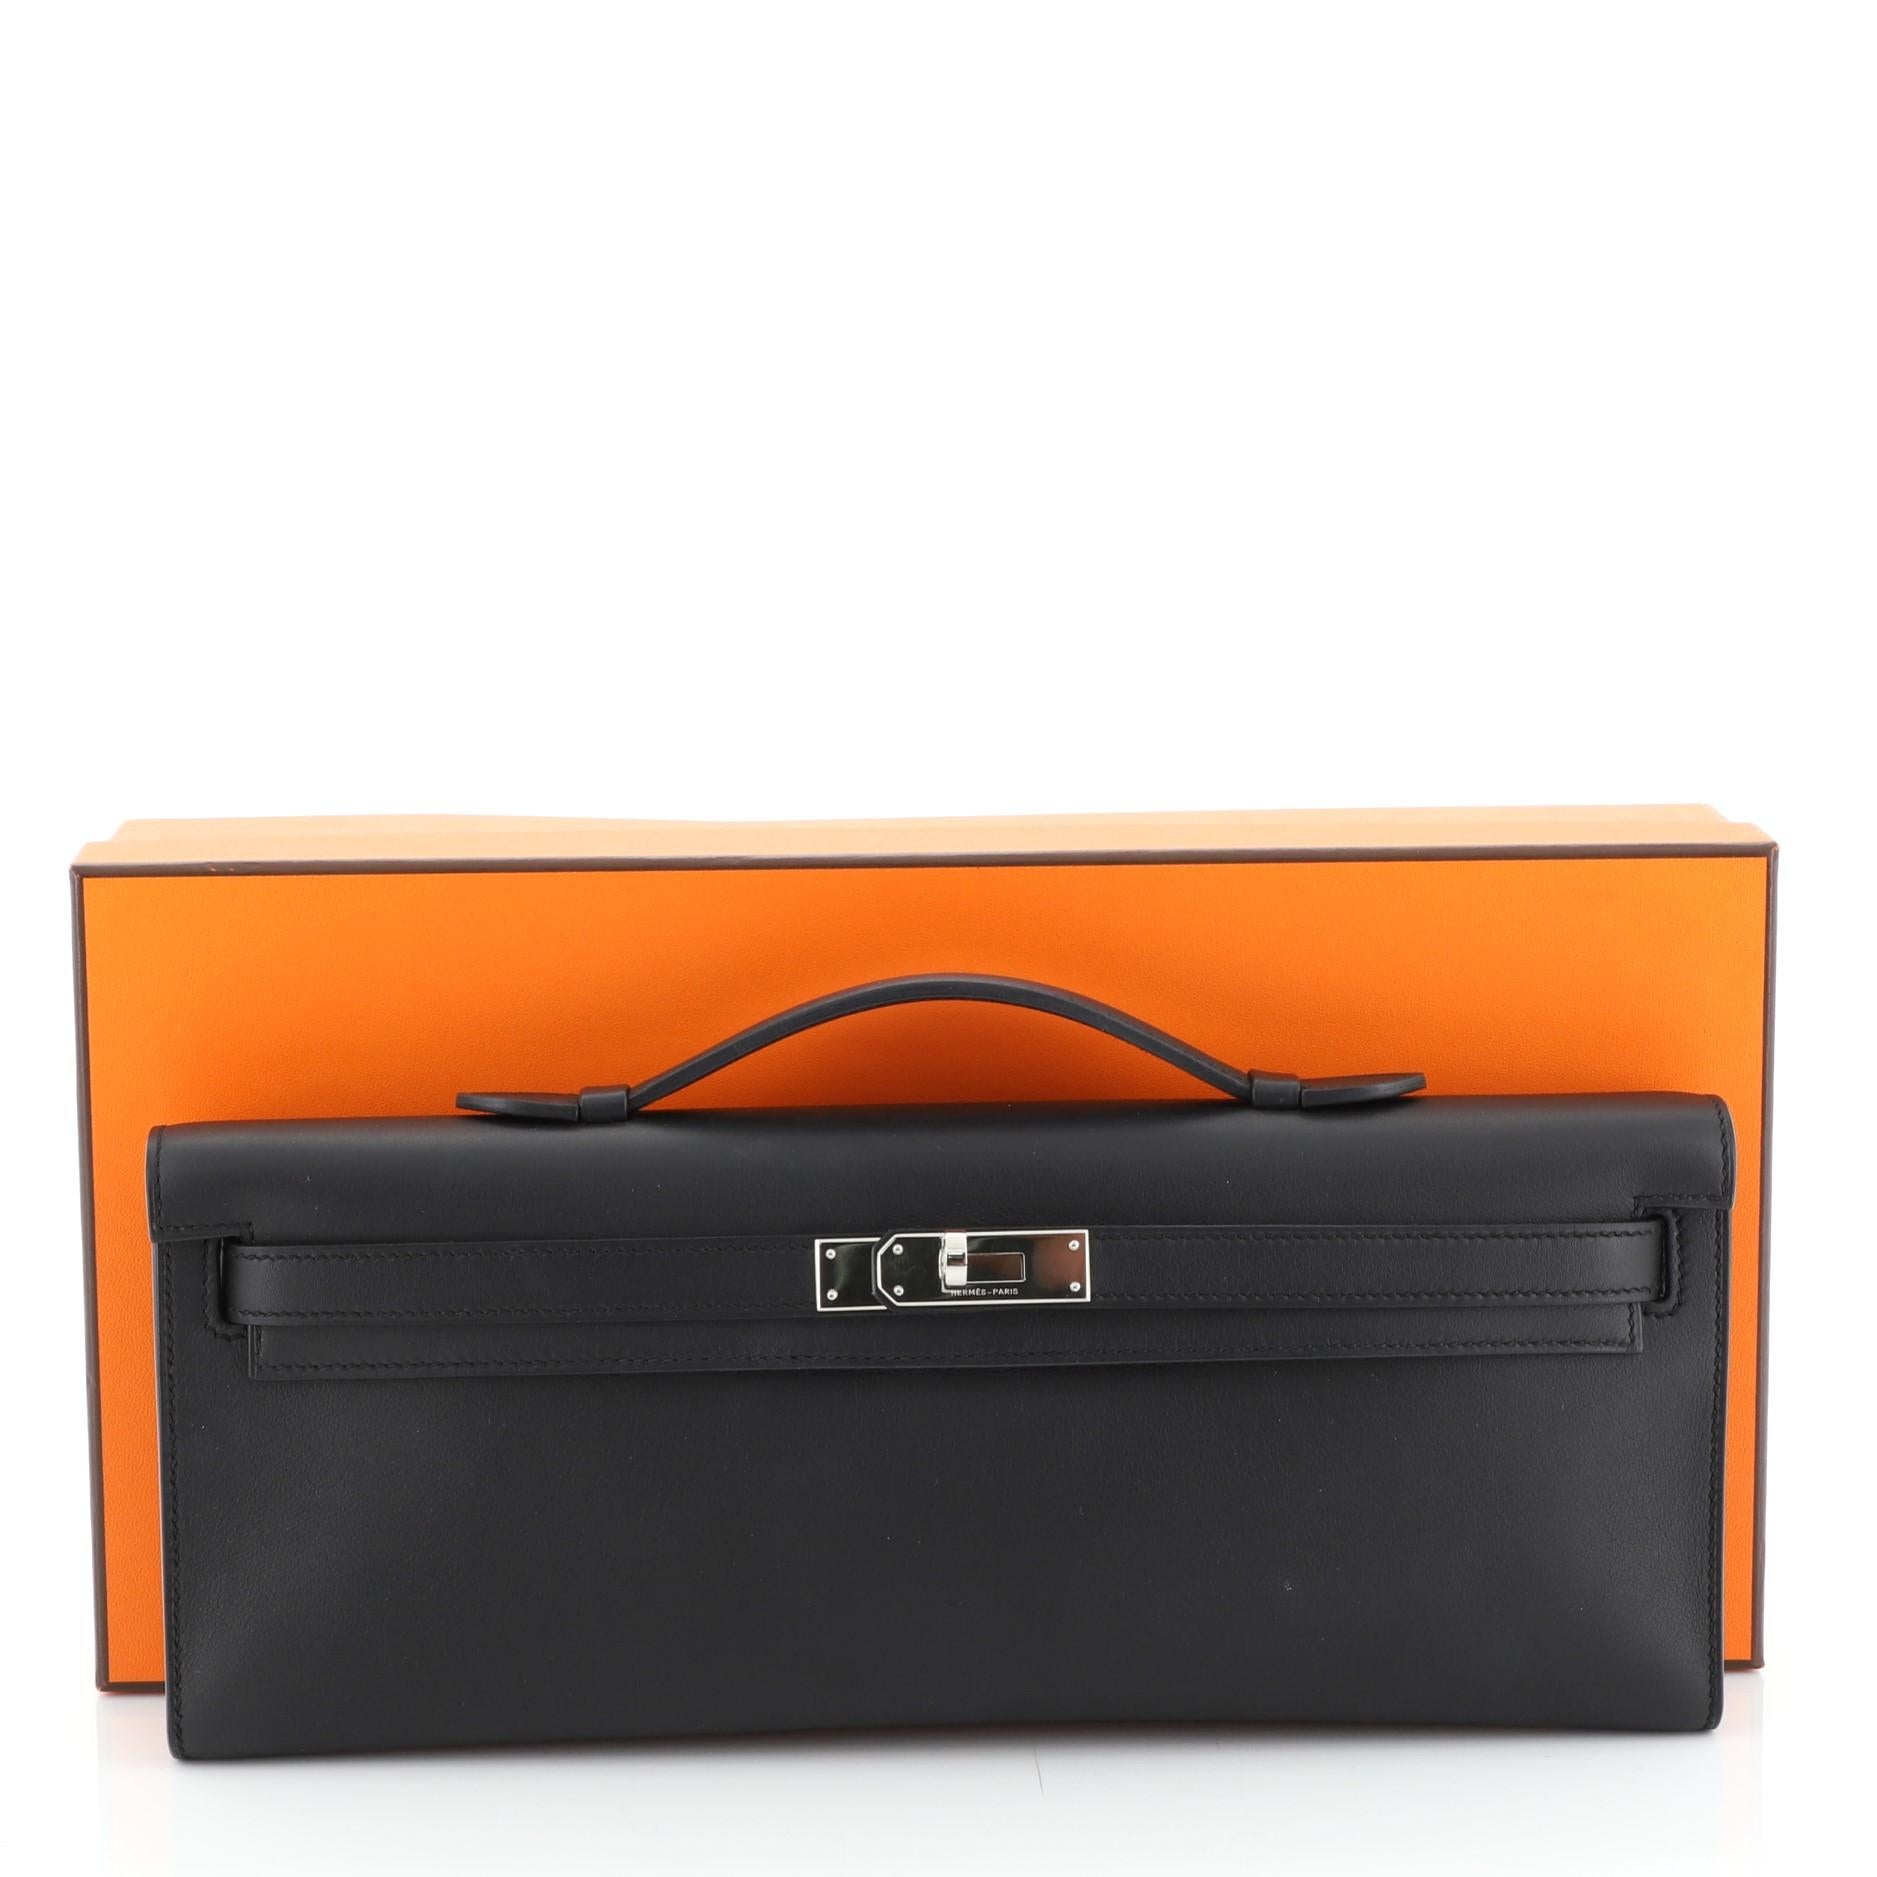 This Hermes Kelly Cut Pochette Swift, crafted in Noir black Swift leather, features a top handle, frontal flap, and palladium hardware. Its turn-lock closure opens to a Noir black Chevre leather interior. Date stamp reads: T (2015).

Condition: